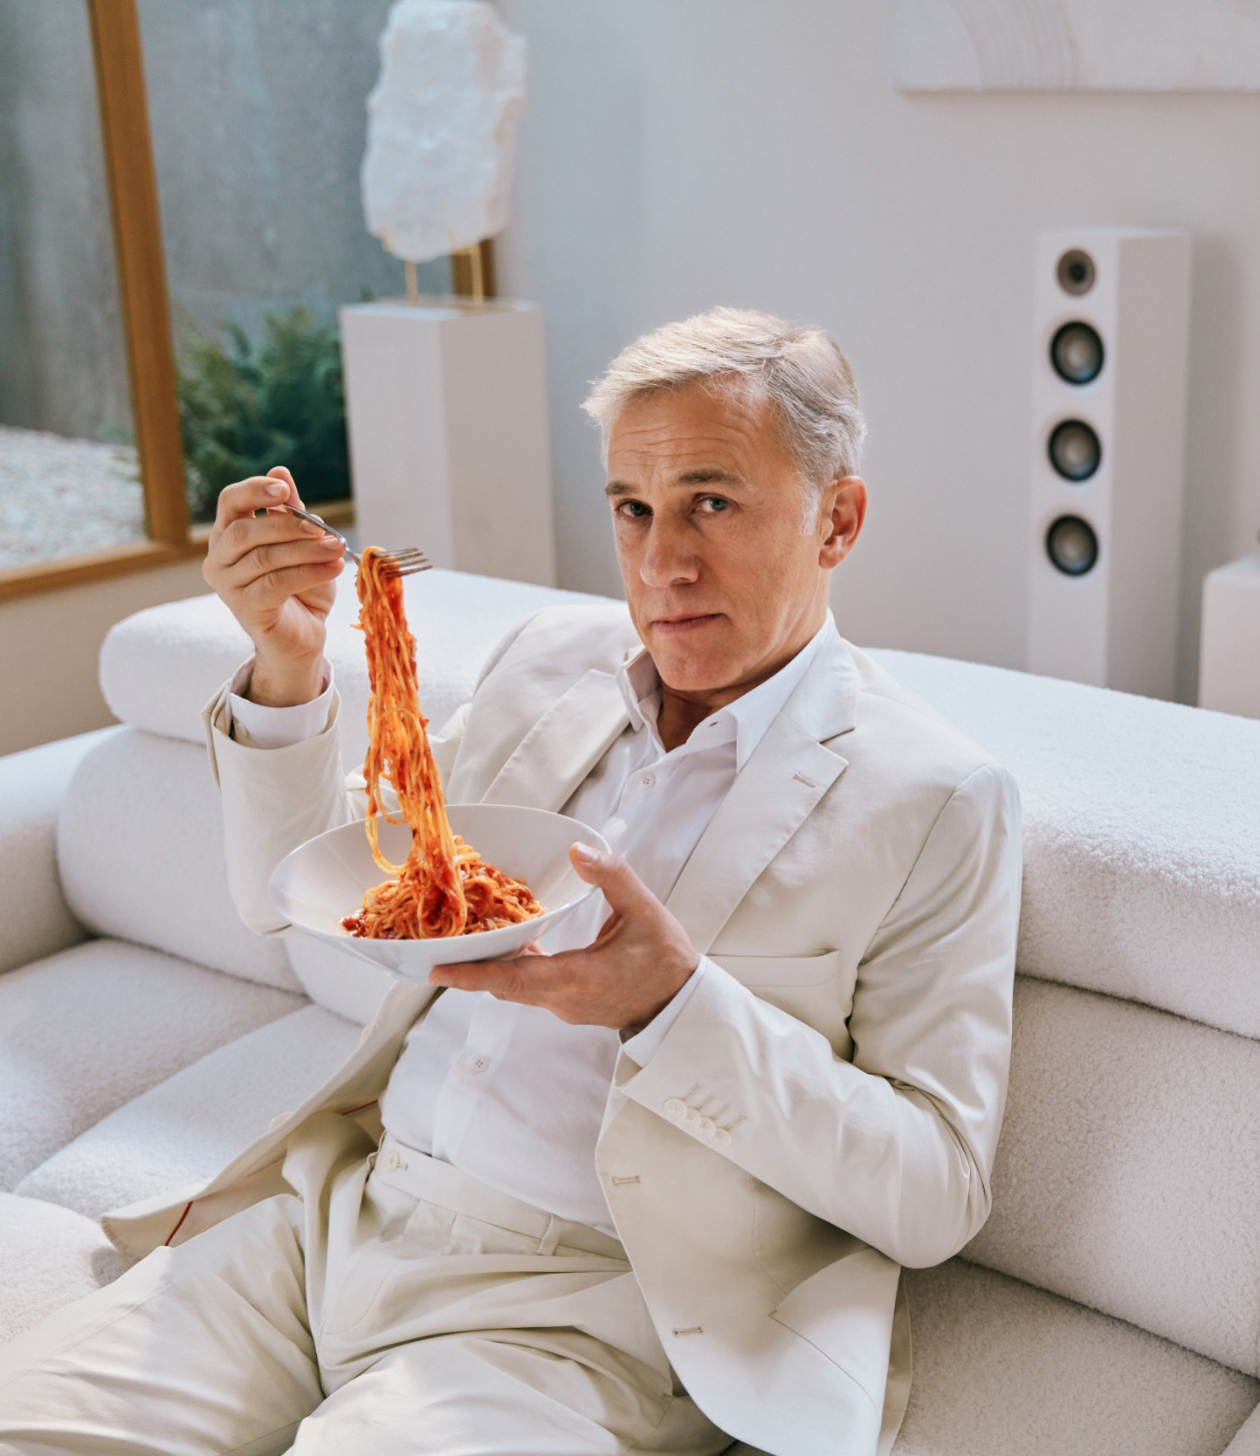 Educational and fun content series starring Christoph Waltz brings across the basics of investing